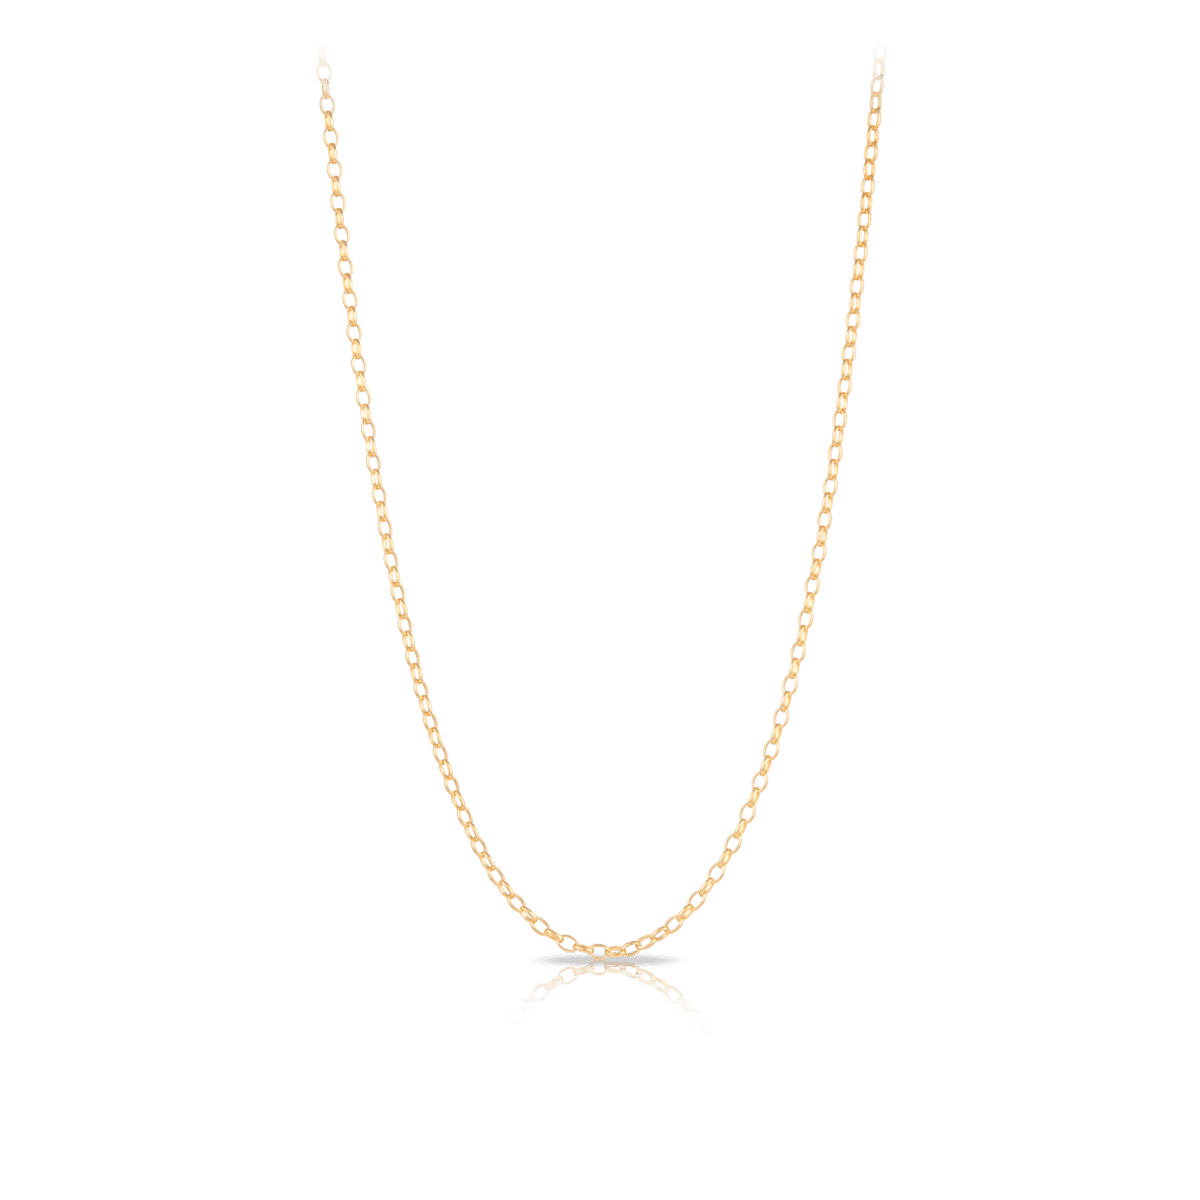 50cm Solid Oval Belcher Link Chain in 9ct Yellow Gold - Wallace Bishop